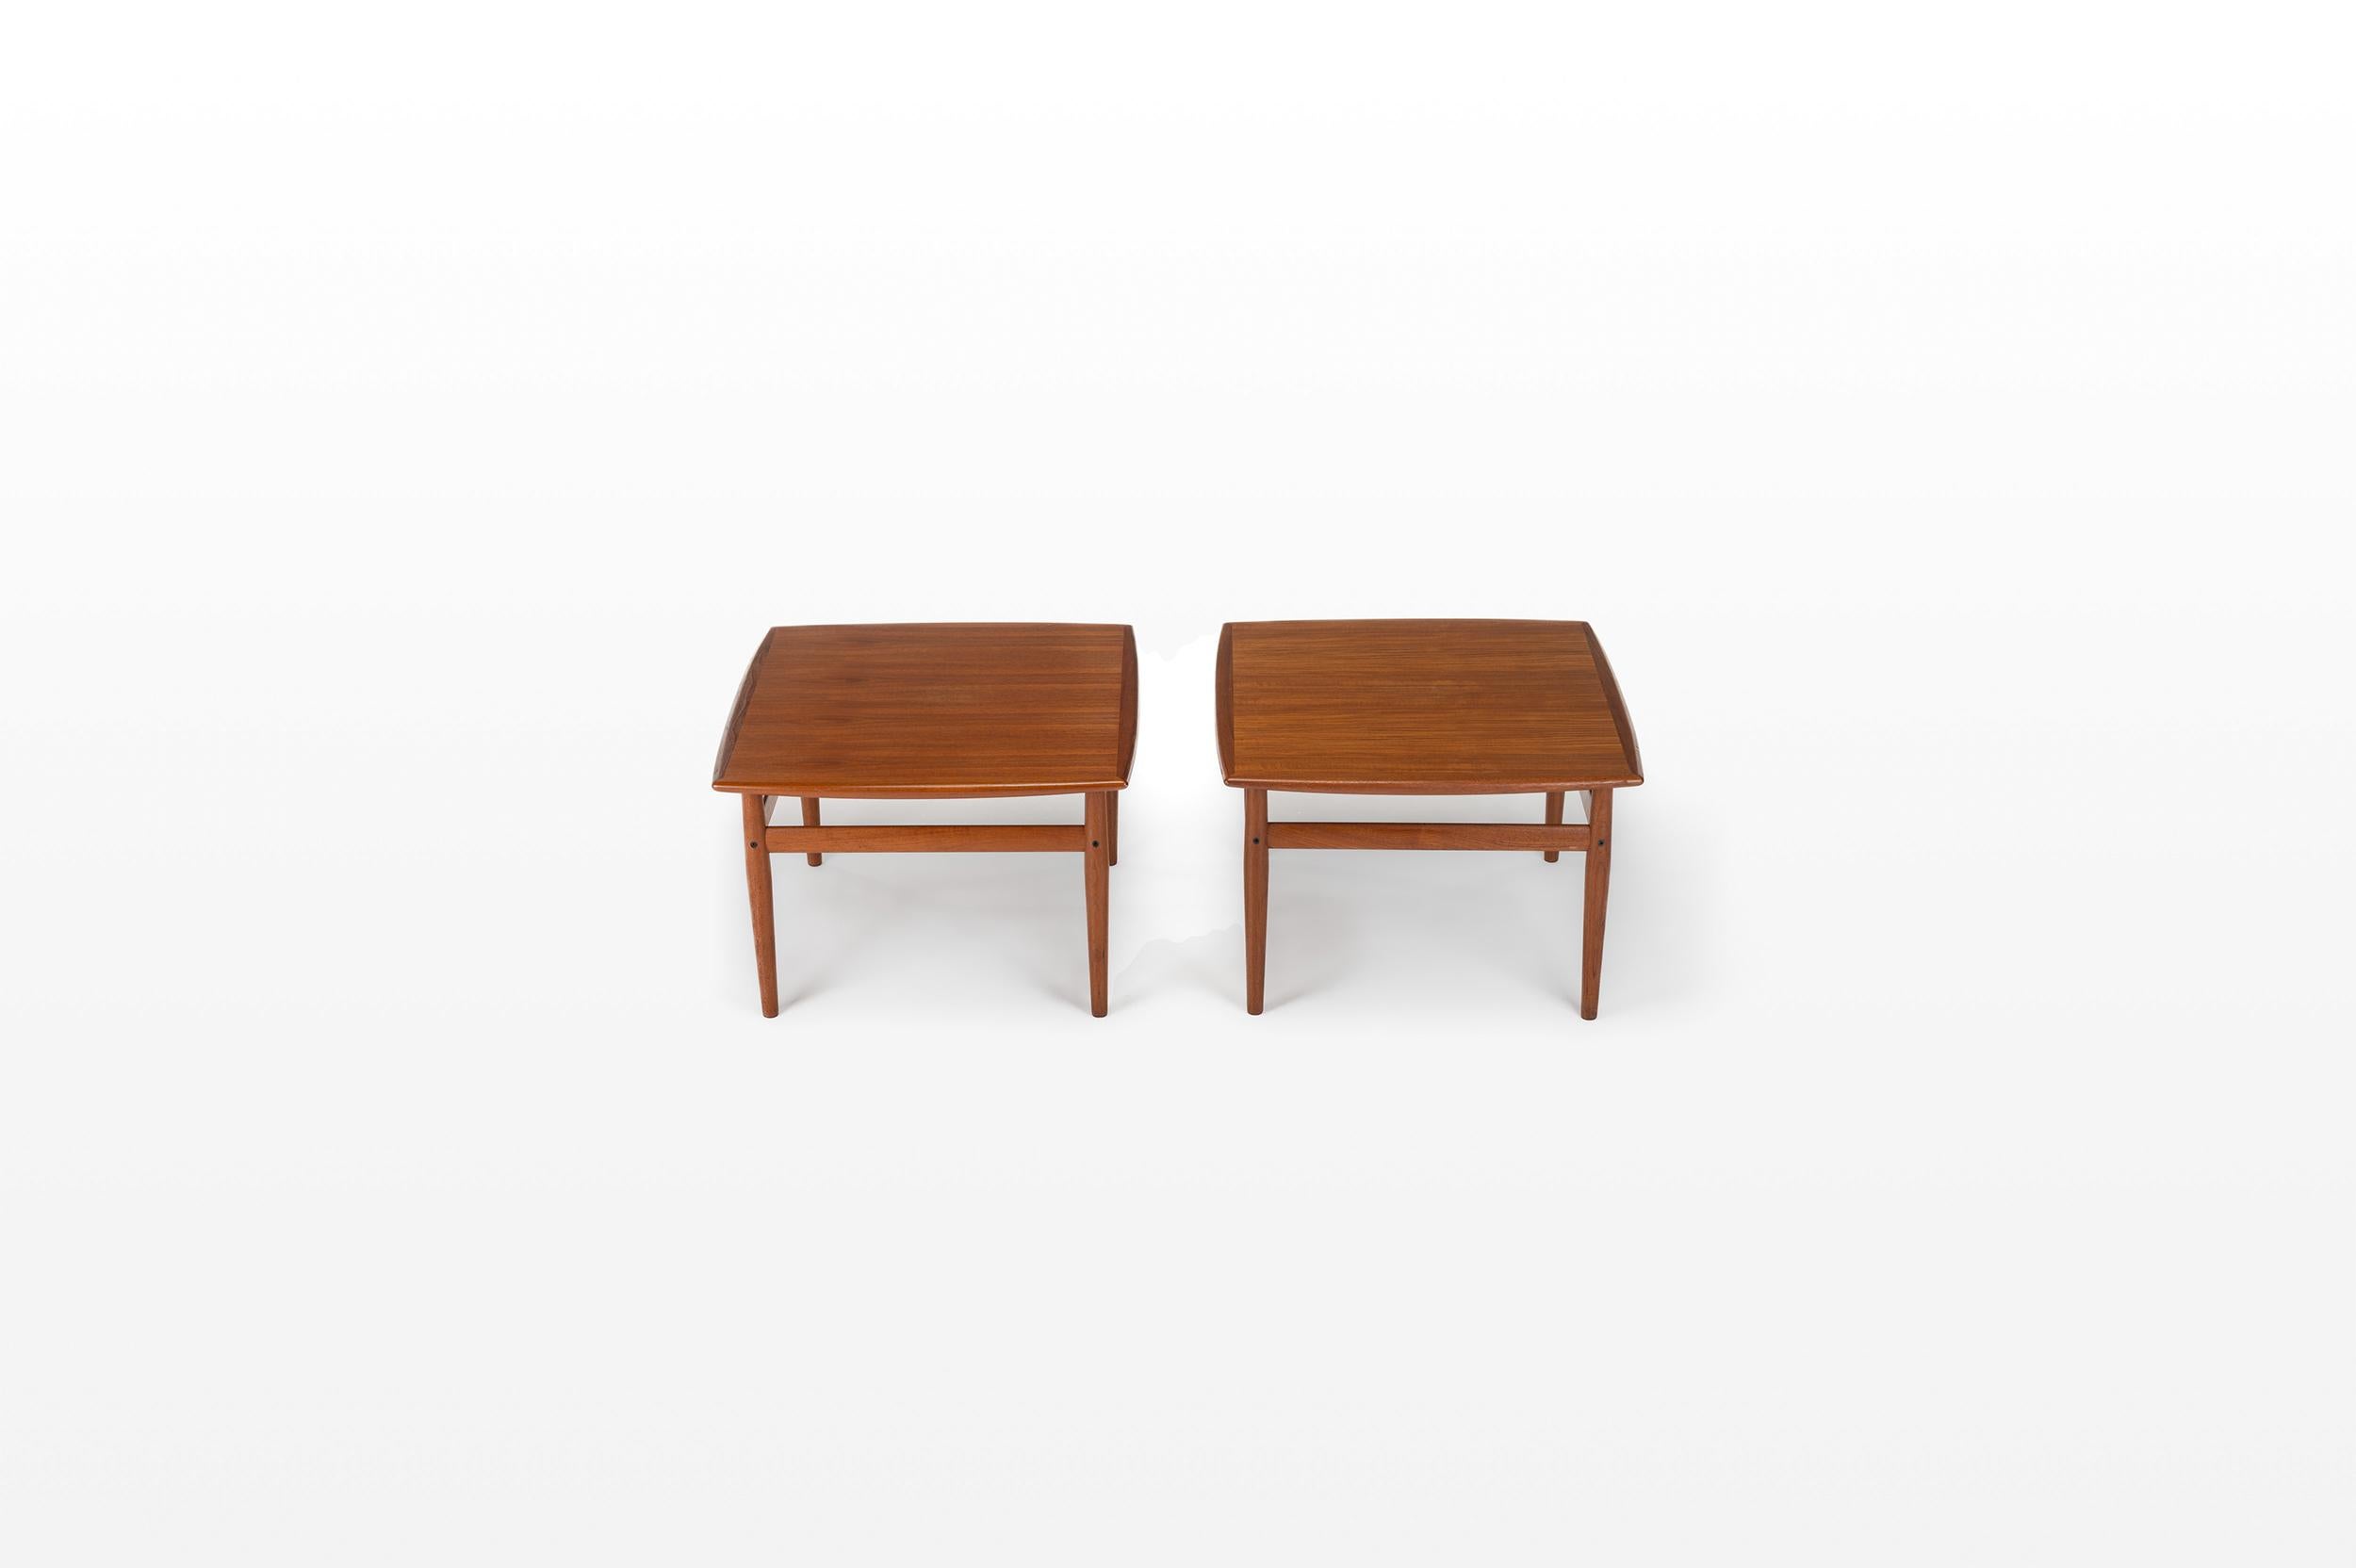 Set of two coffee tables in teak by Grete Jalk for Glostrup, Denmark 1960s. These two coffee tables have been restored by our own studio.